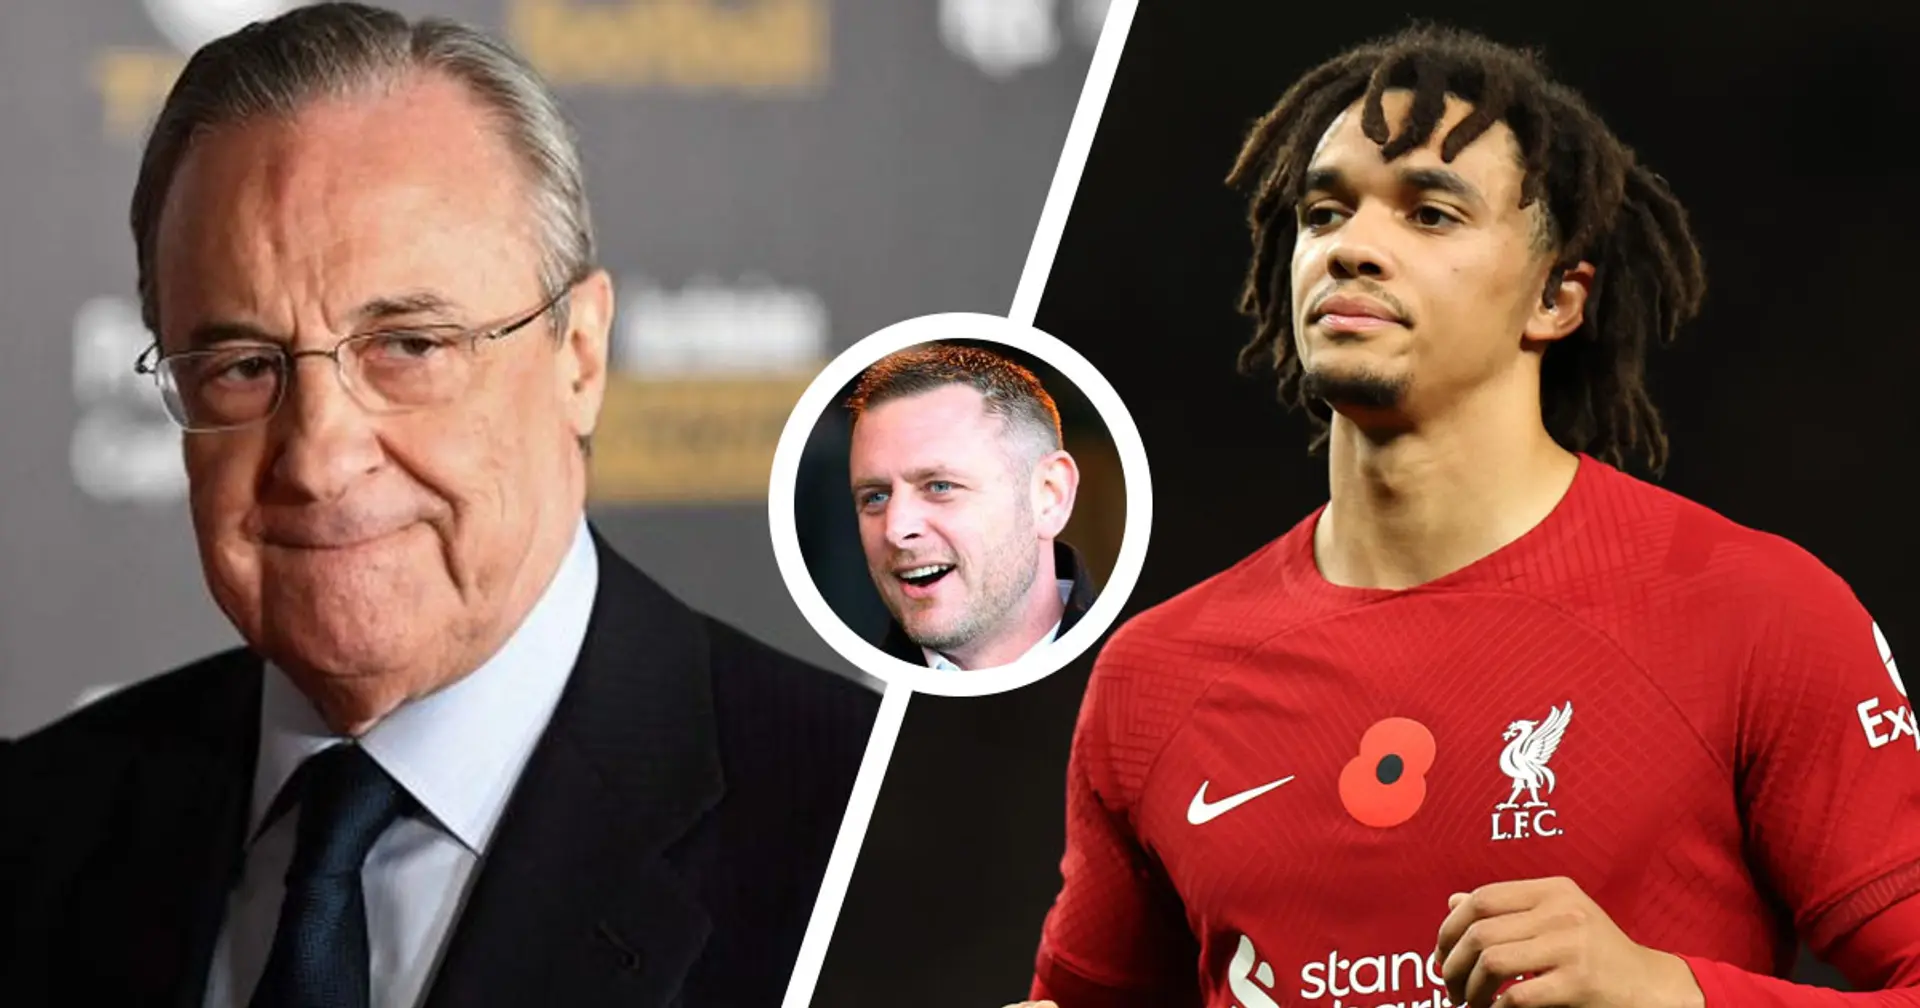 Peterborough United chairman: Real Madrid would pay Liverpool £150m for Alexander-Arnold signing